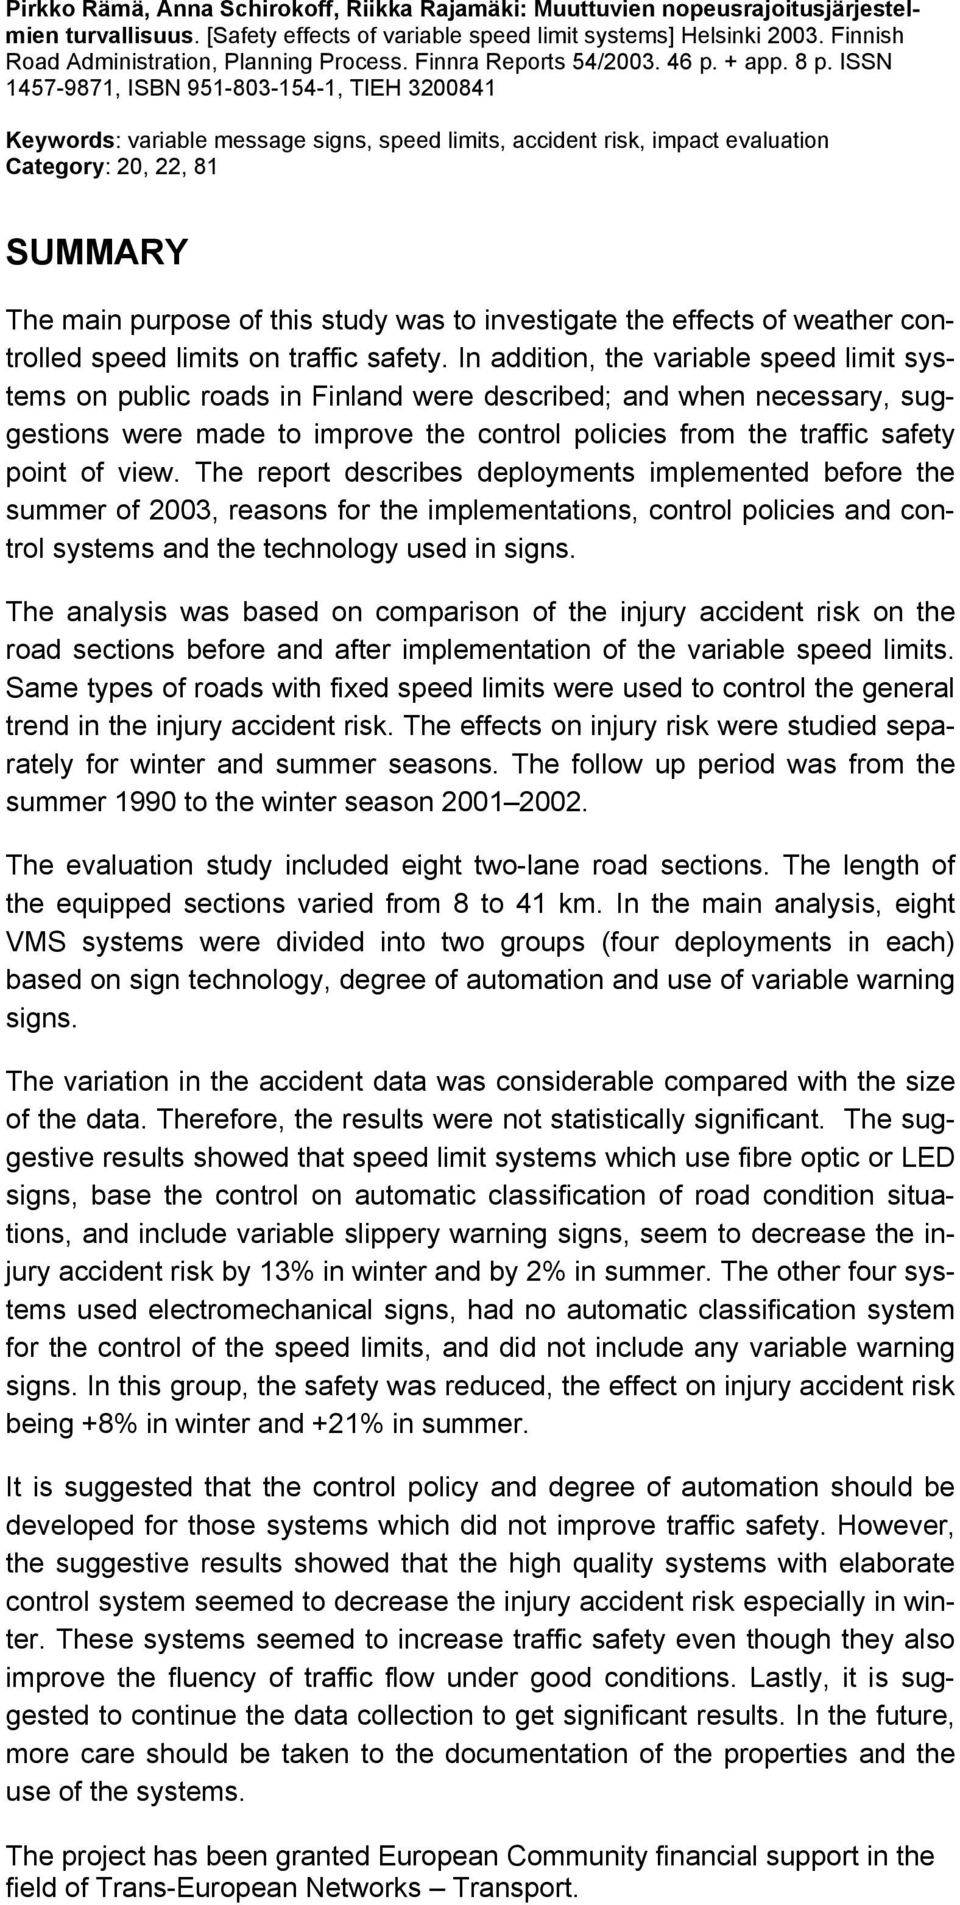 ISSN 1457-9871, ISBN 951-803-154-1, TIEH 3200841 Keywords: variable message signs, speed limits, accident risk, impact evaluation Category: 20, 22, 81 SUMMARY The main purpose of this study was to